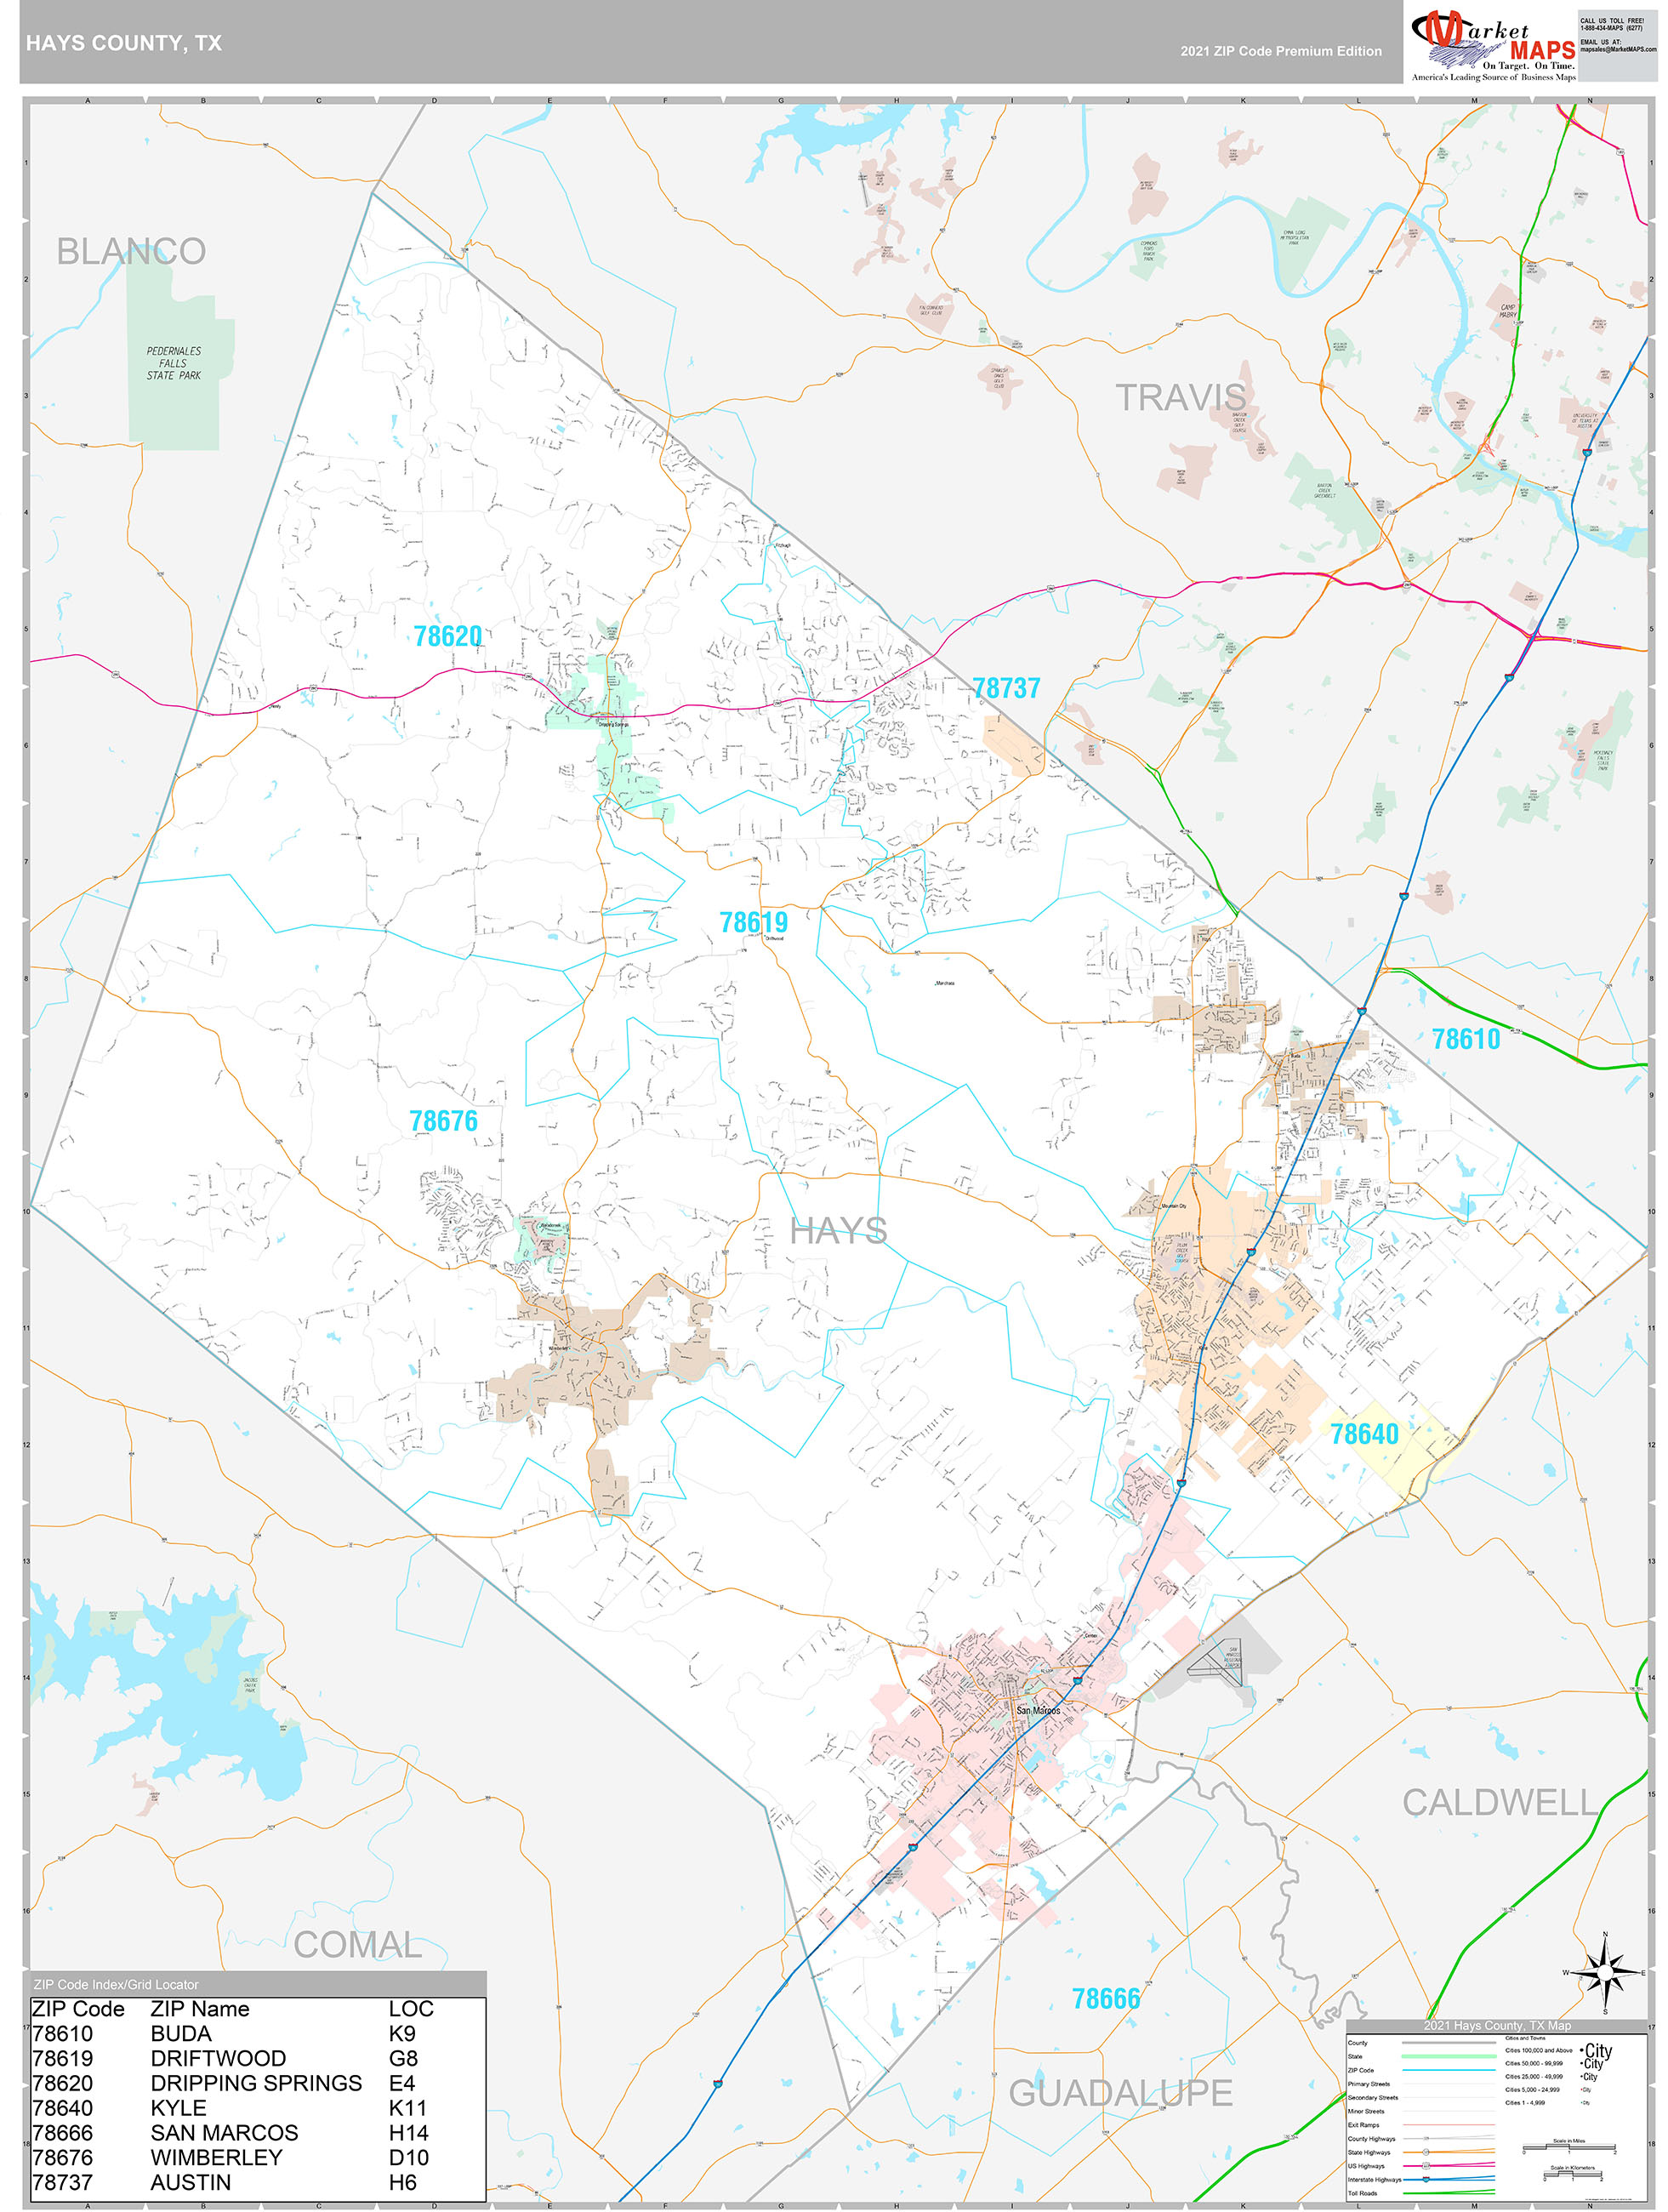 Hays County, TX Wall Map Premium Style by MarketMAPS - MapSales